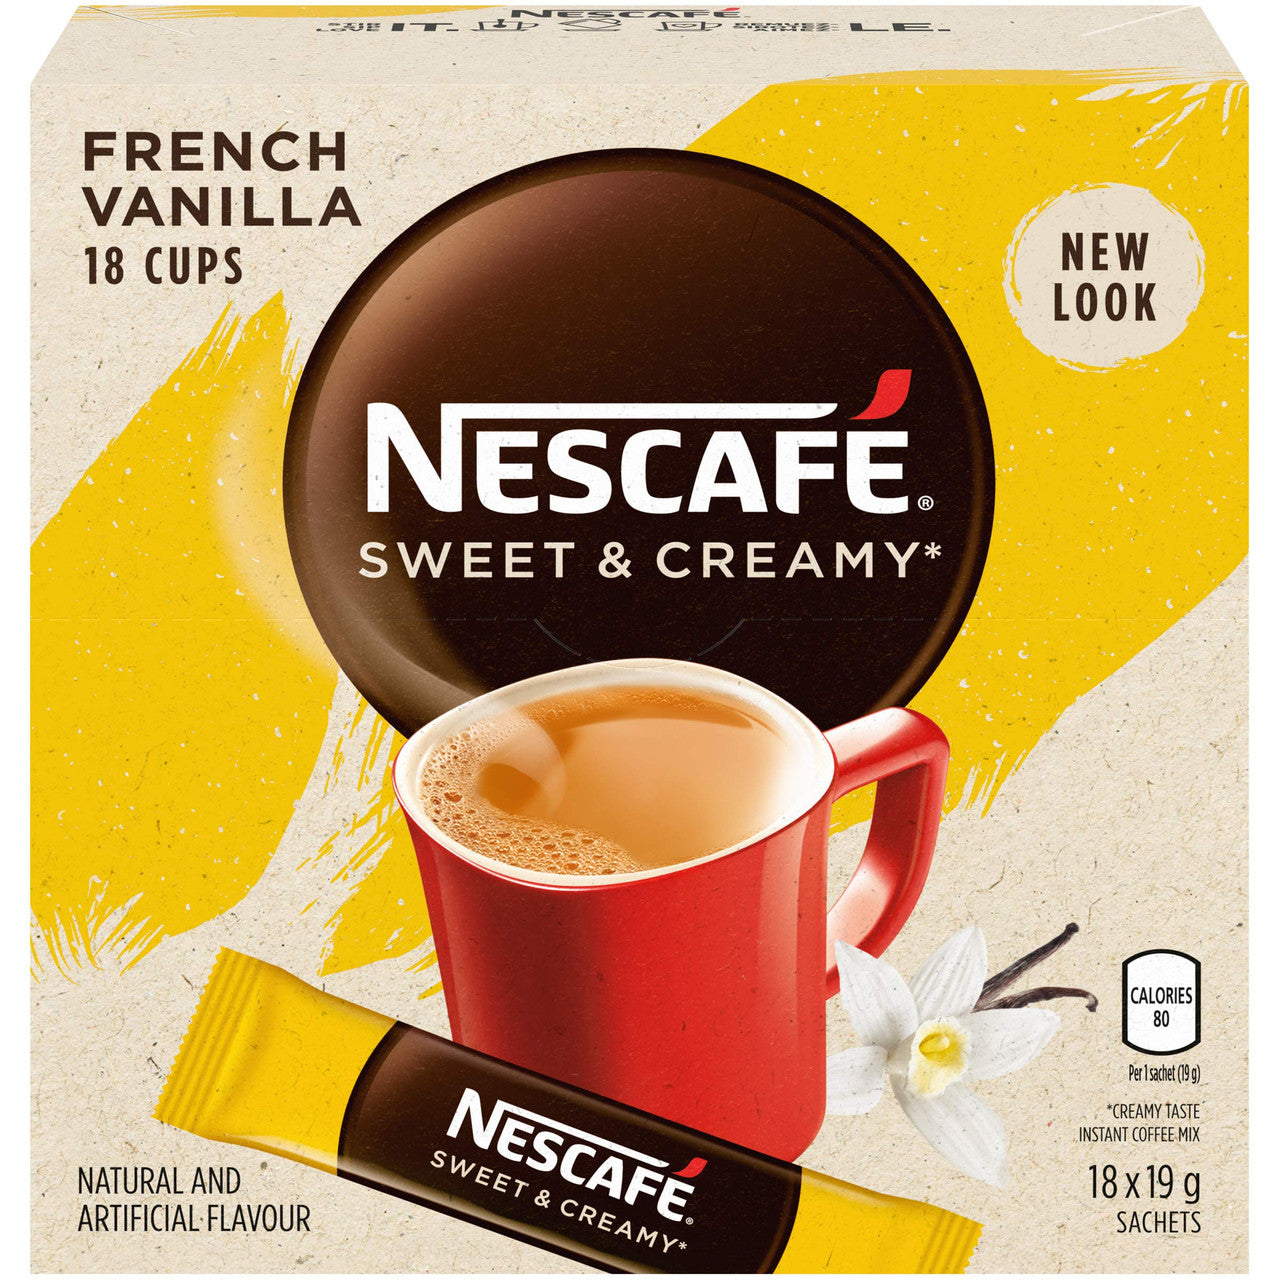 NESCAFE Sweet & Creamy French Vanilla, Instant Coffee Sachets, 18x19g {Imported from Canada}